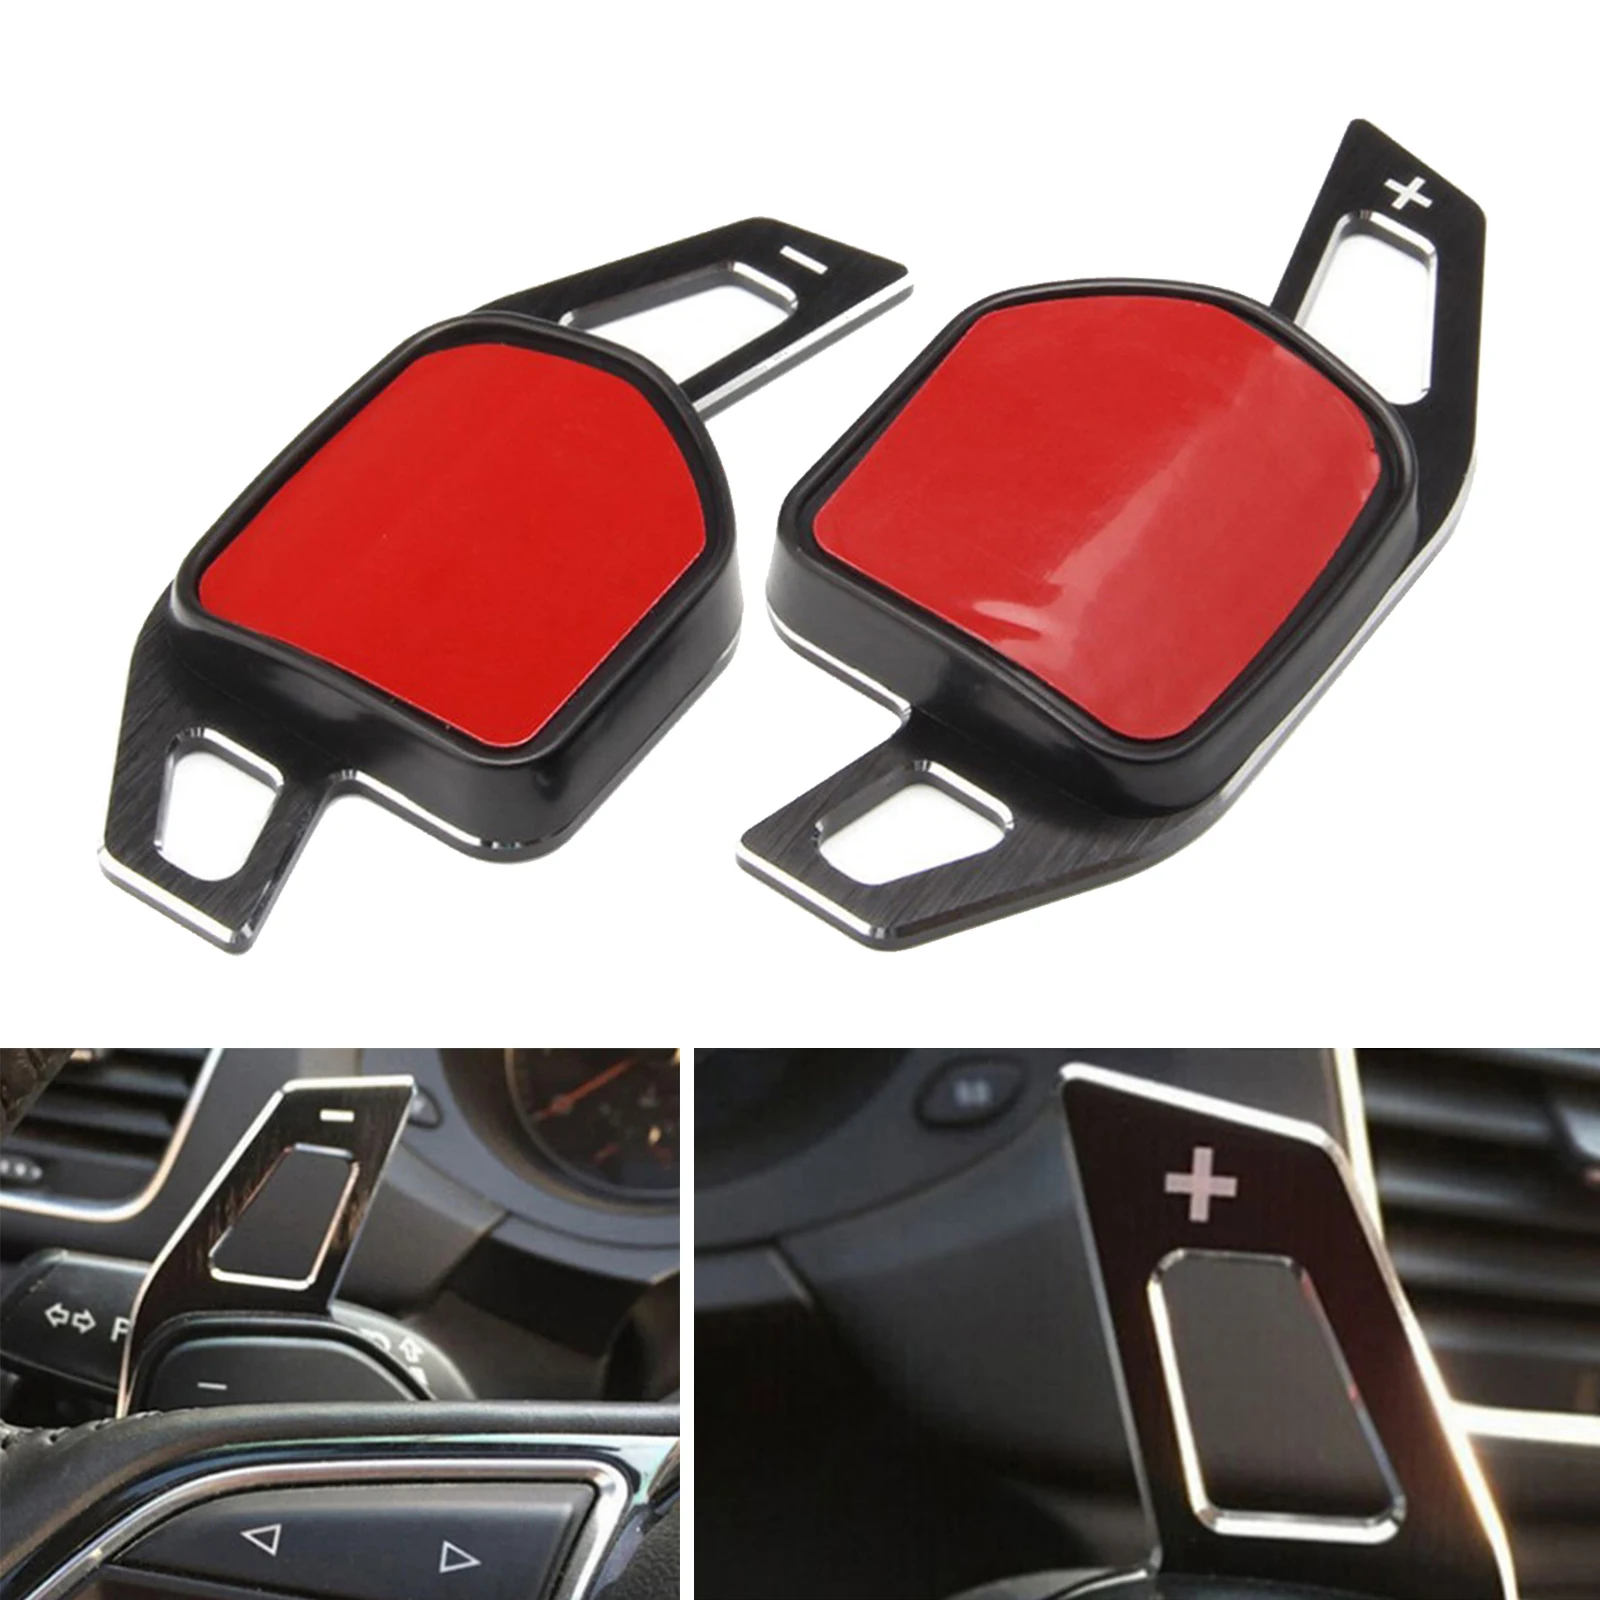 2x Steering Wheel Paddle Shift Extensions for Audi TT/ TTS(2007-2011), R8(2009-2011), A1(2010-2011)